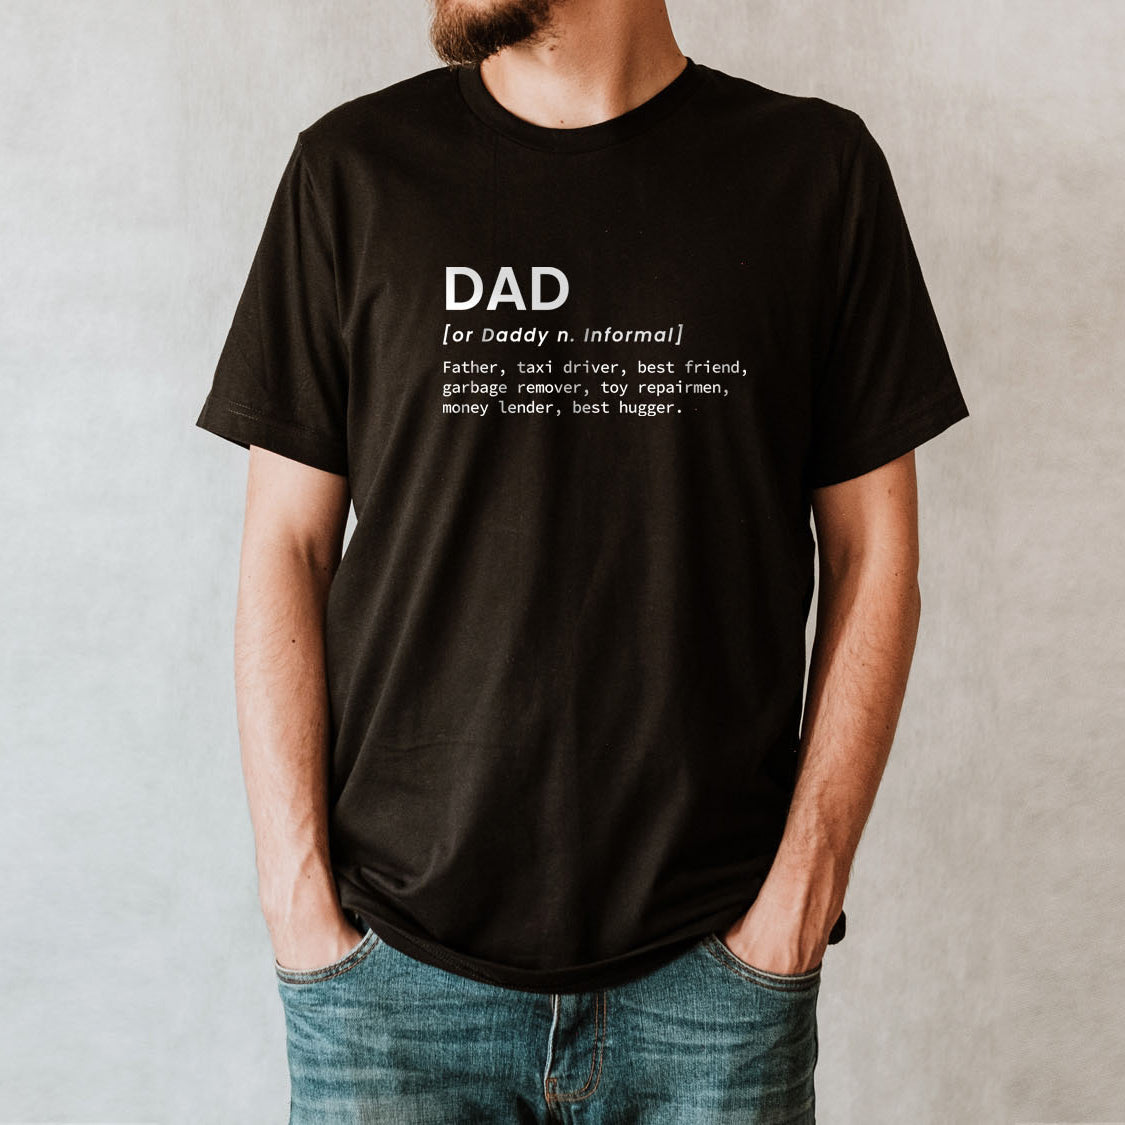 Funny Definition of Dad T-shirt - Funny Family Retro Vintage Design Printed Tee Shirt